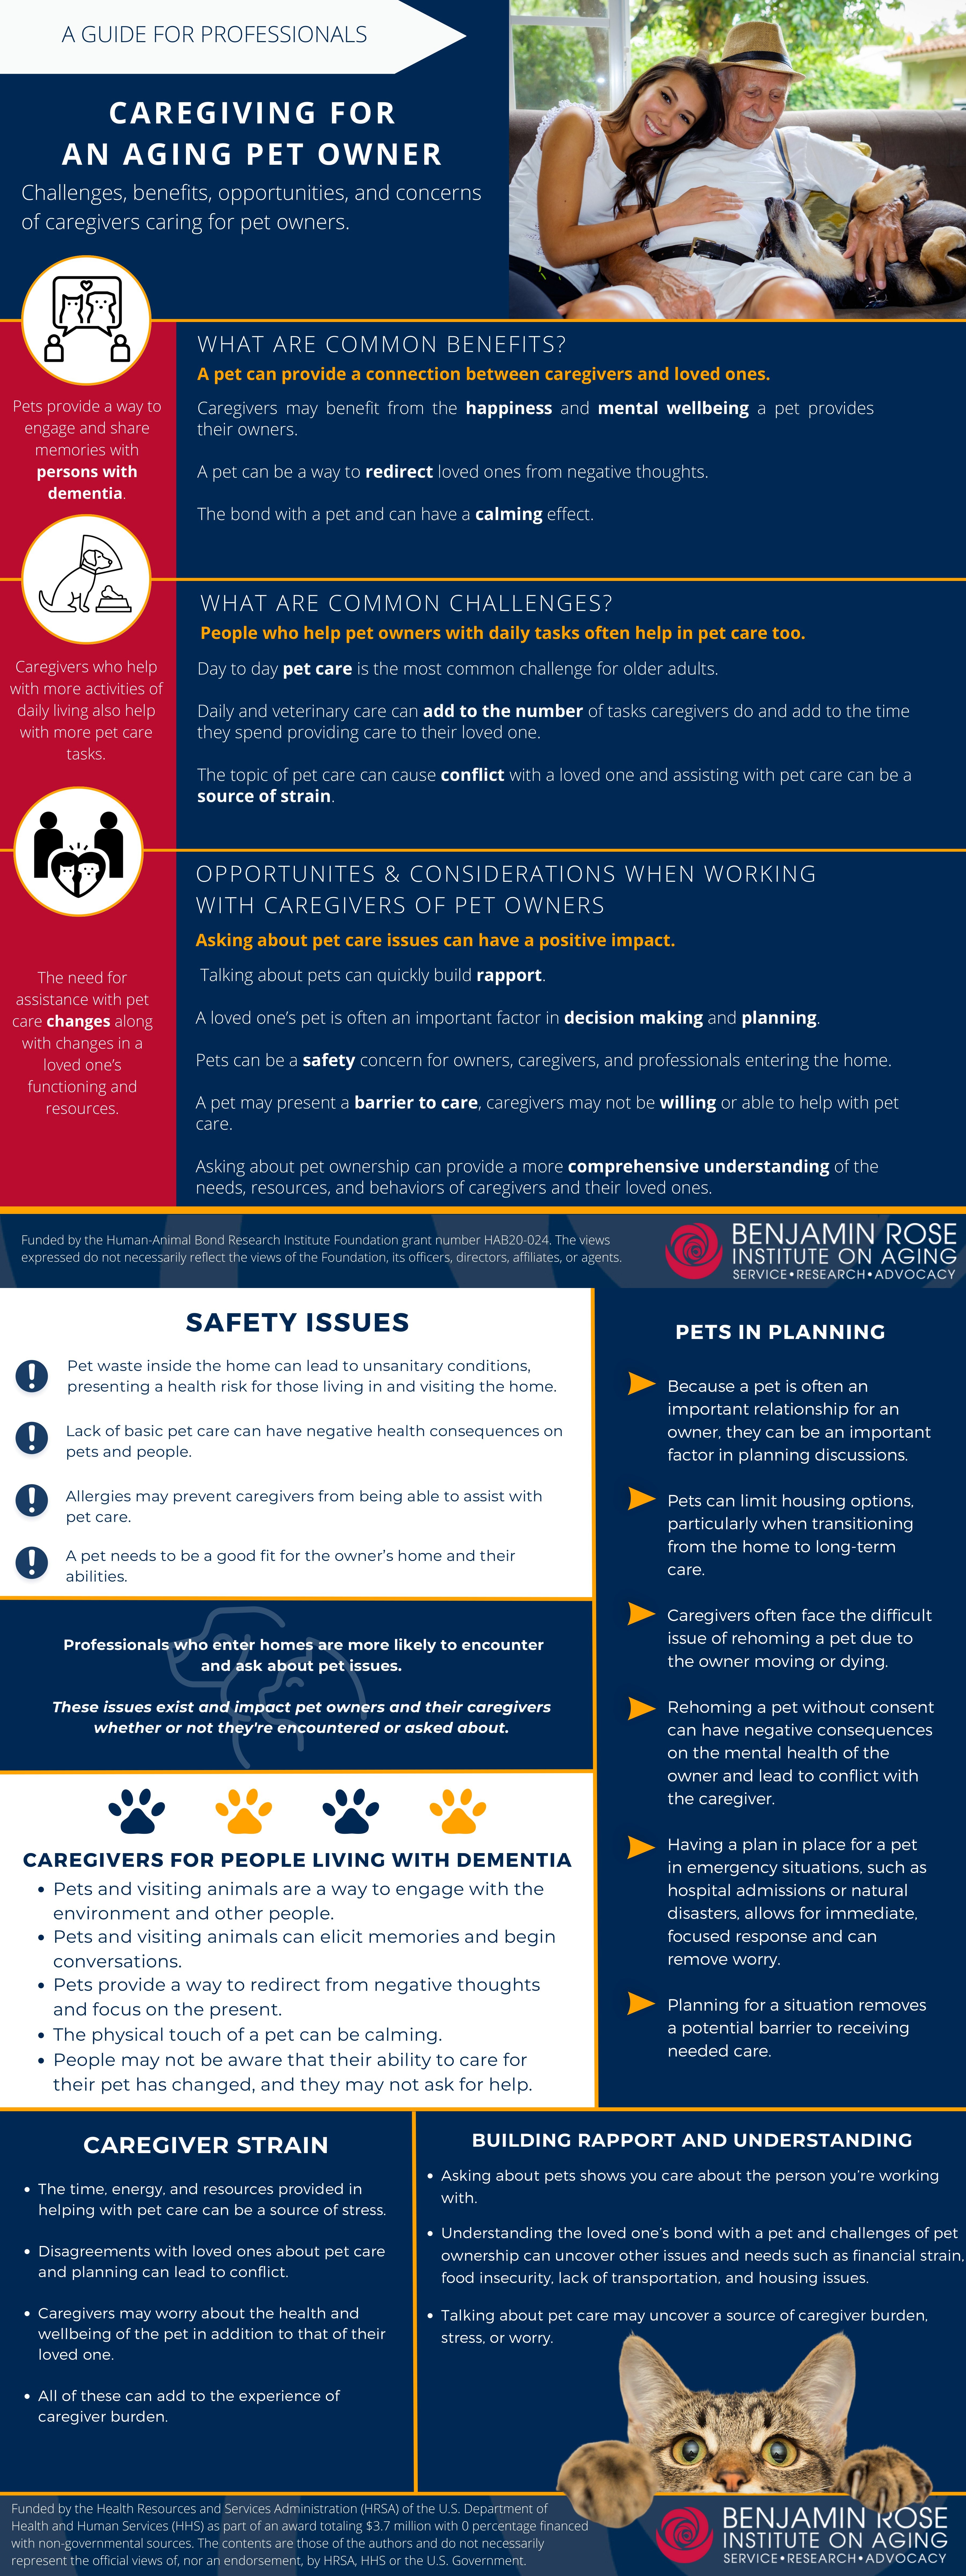 This image is an infographic exploring challenges, benefits, opportunities, and concerns of caregivers caring for pet owners. Click on the image to download the PDF version of this image